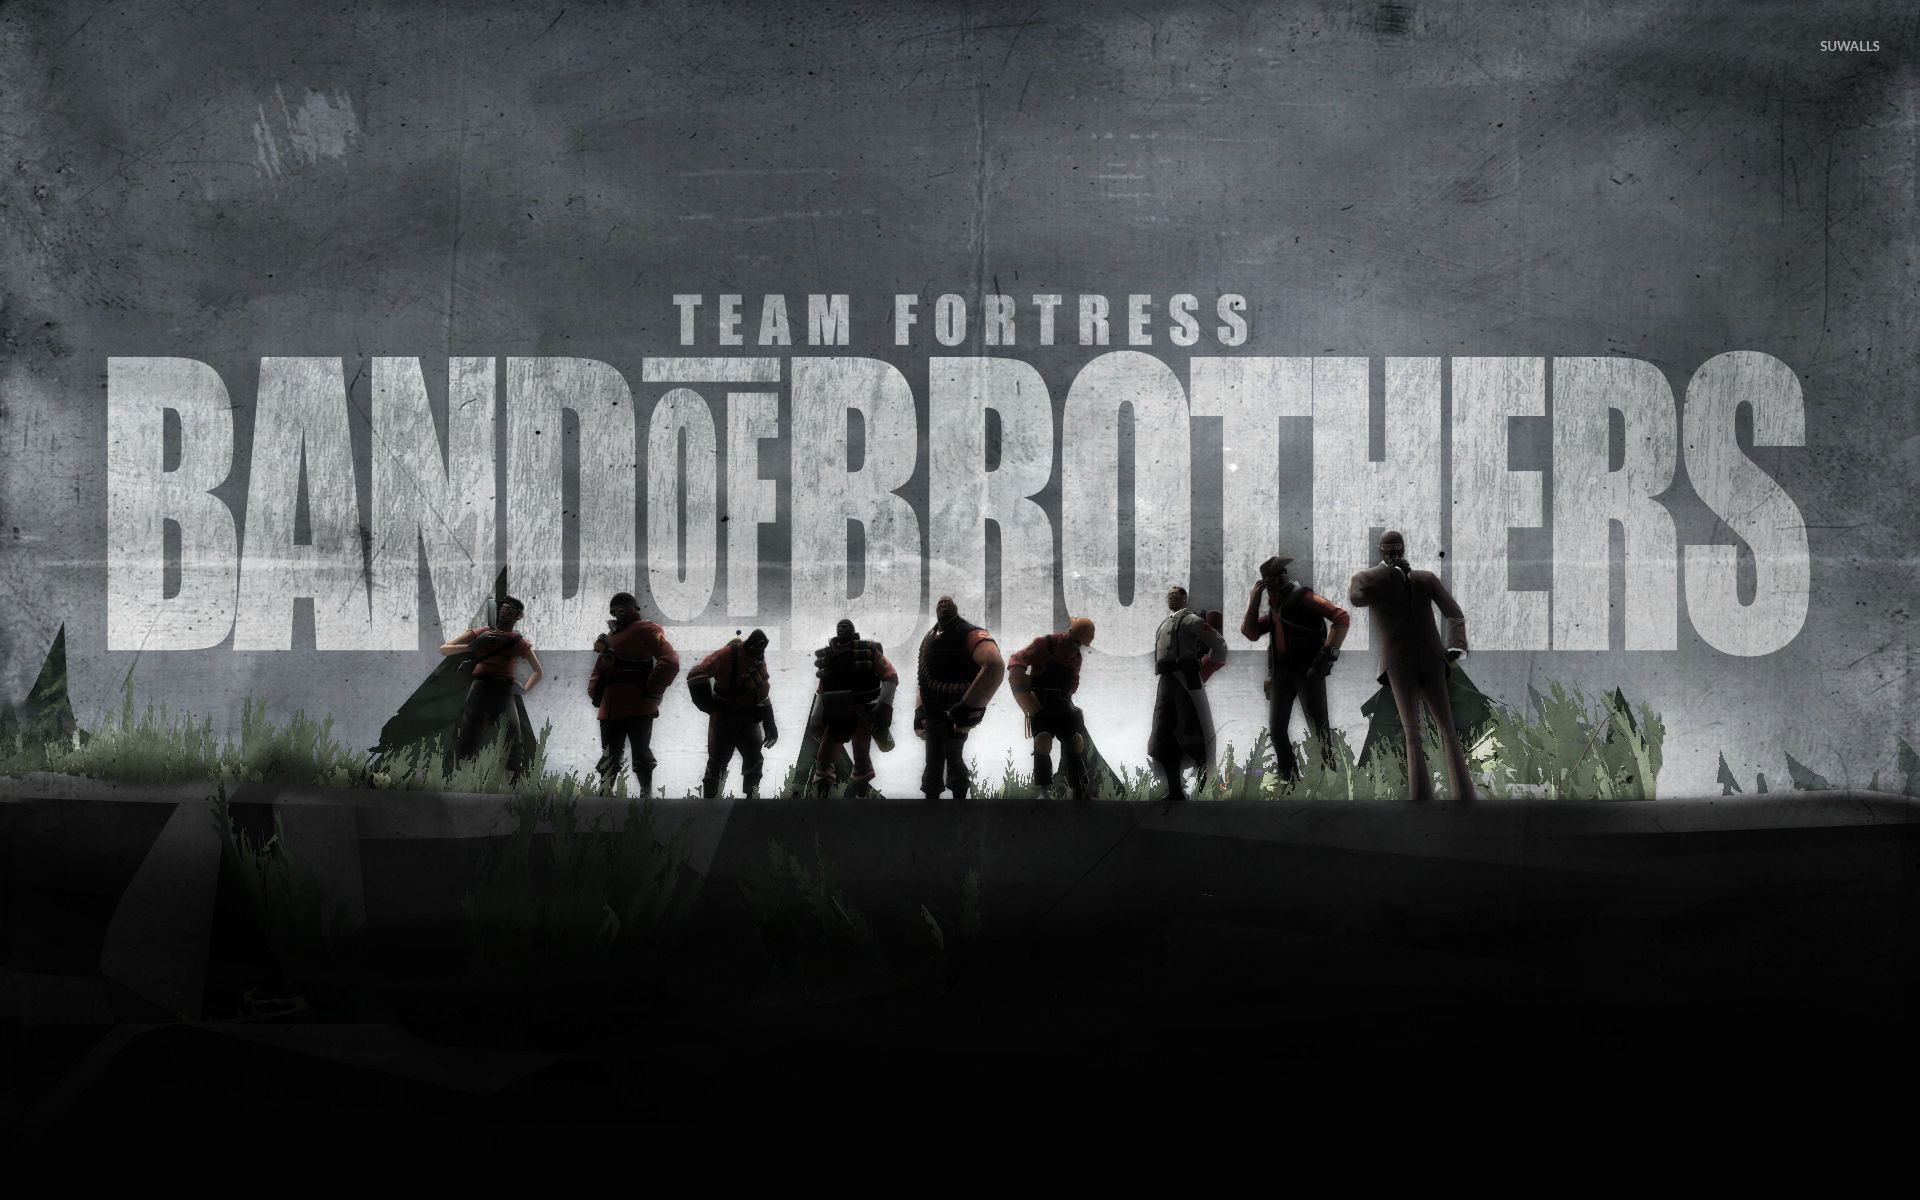 Band Of Brothers Wallpapers and Background Images   stmednet